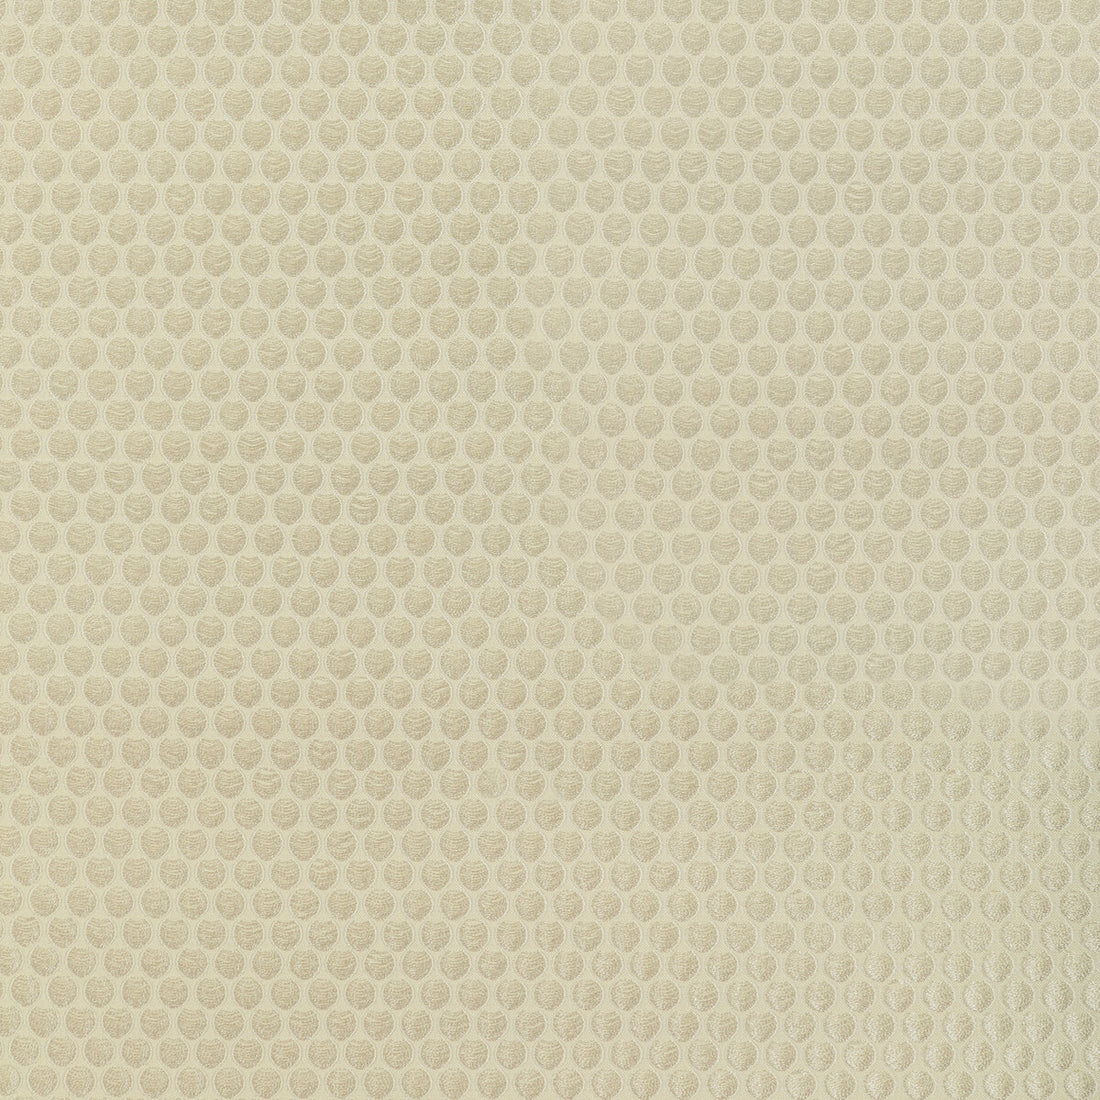 Perfect Catch fabric in gold color - pattern 4950.416.0 - by Kravet Couture in the Modern Luxe Silk Luster collection